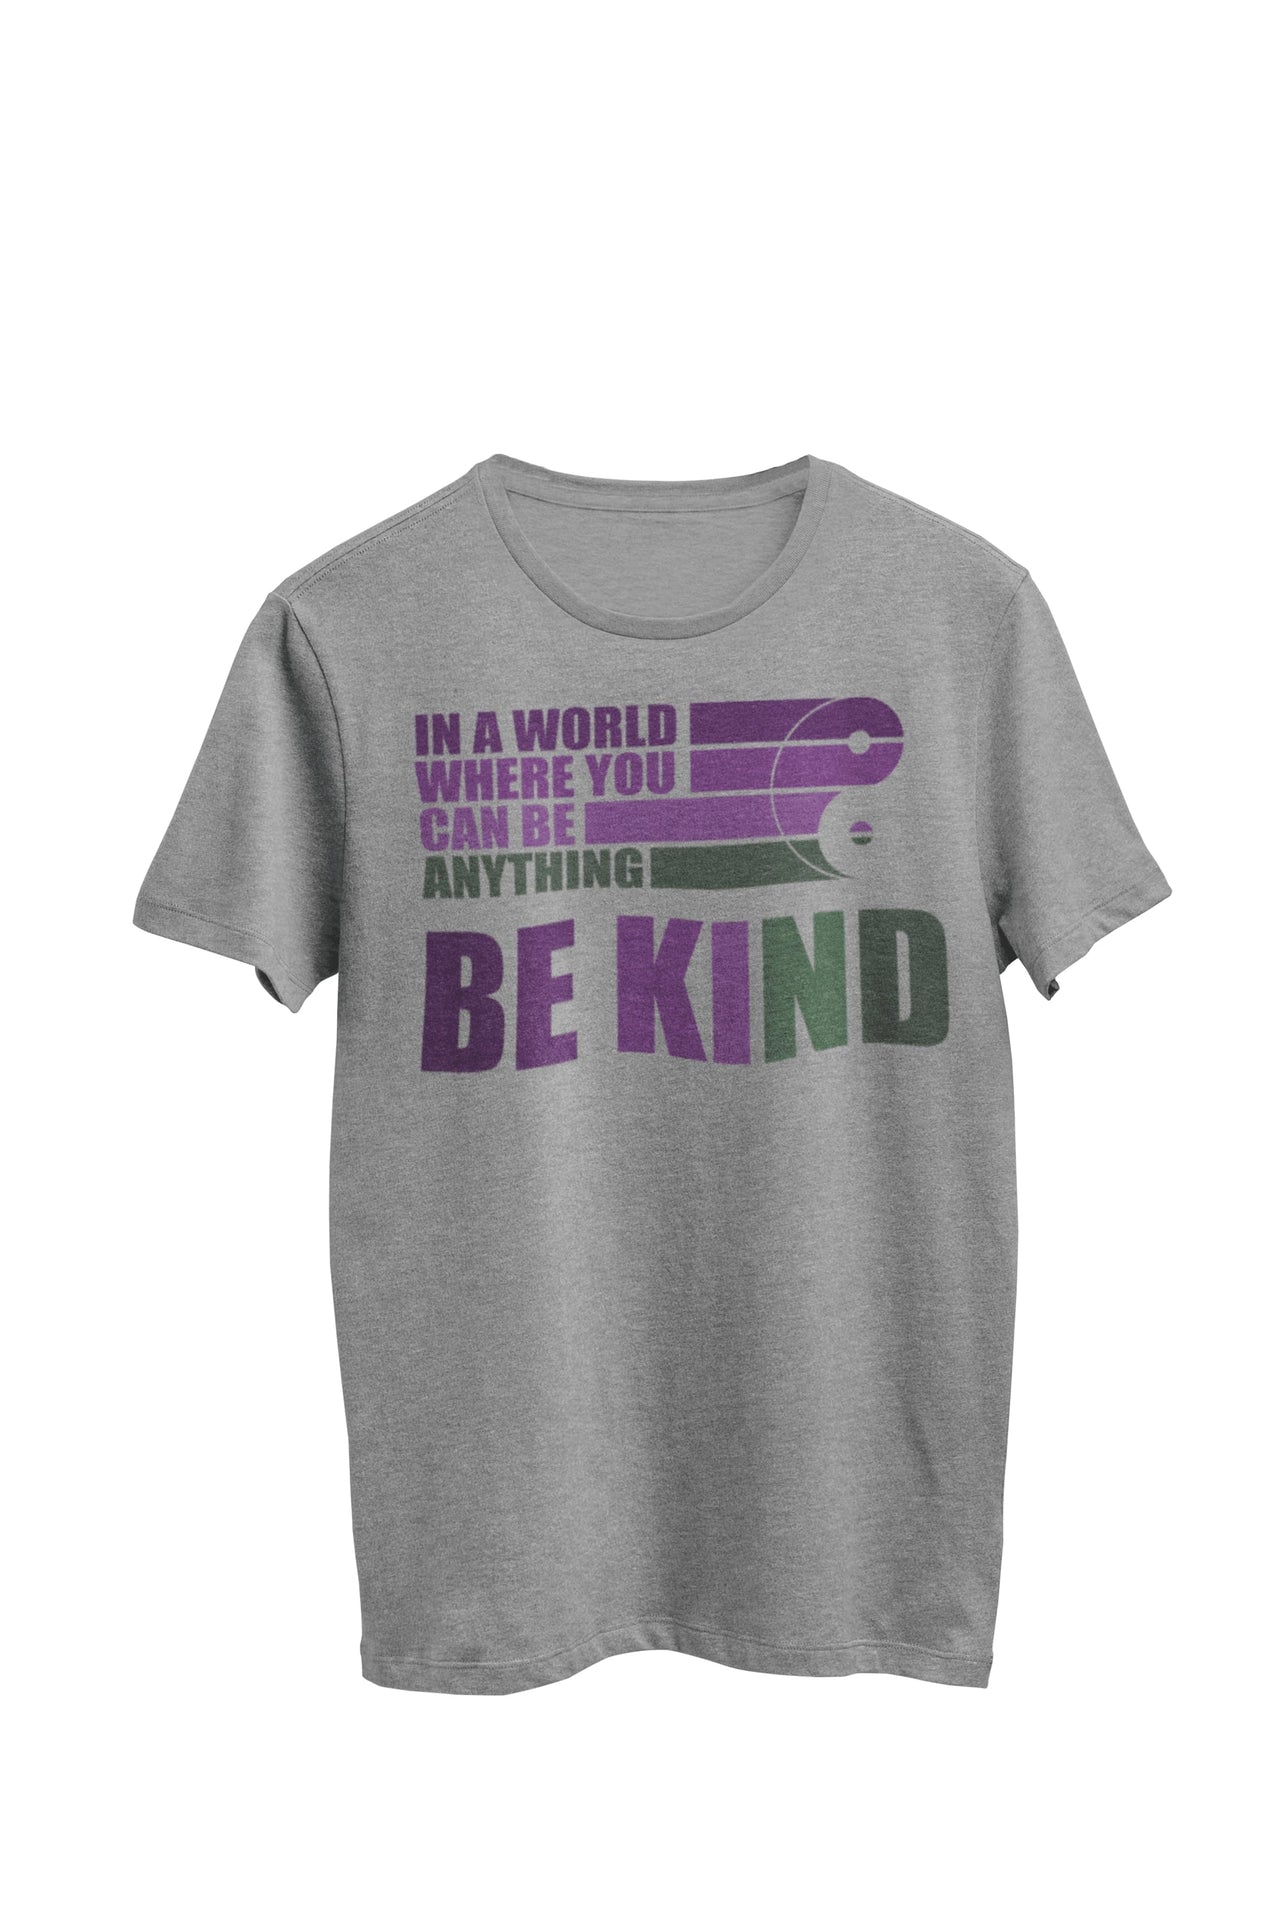 Gray heather unisex t-shirt featuring the text 'In a world where you can be anything Be Kind' in green and purple font. Designed by WooHoo Apparel.